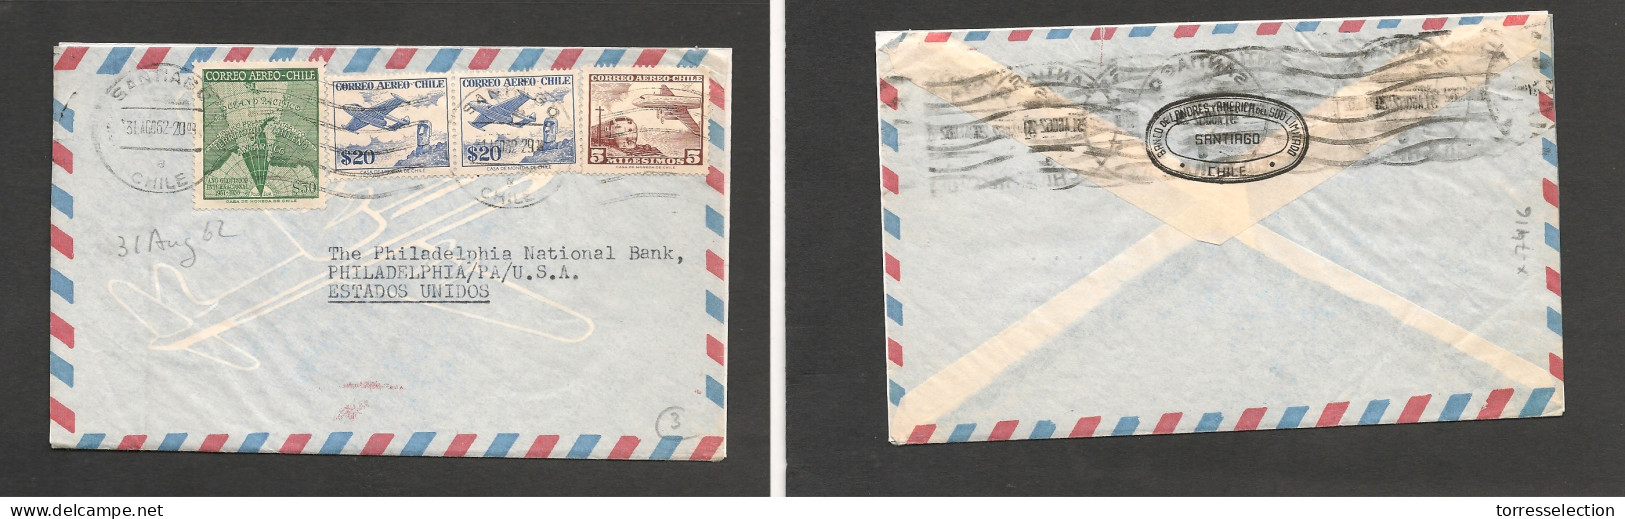 CHILE. Chile - Cover - 1962 31 Aug Stgo To USA Pha Air Mult Fkd Env $90,05 RateEx-Prof West UK Airmails Coll.- . Easy De - Chili